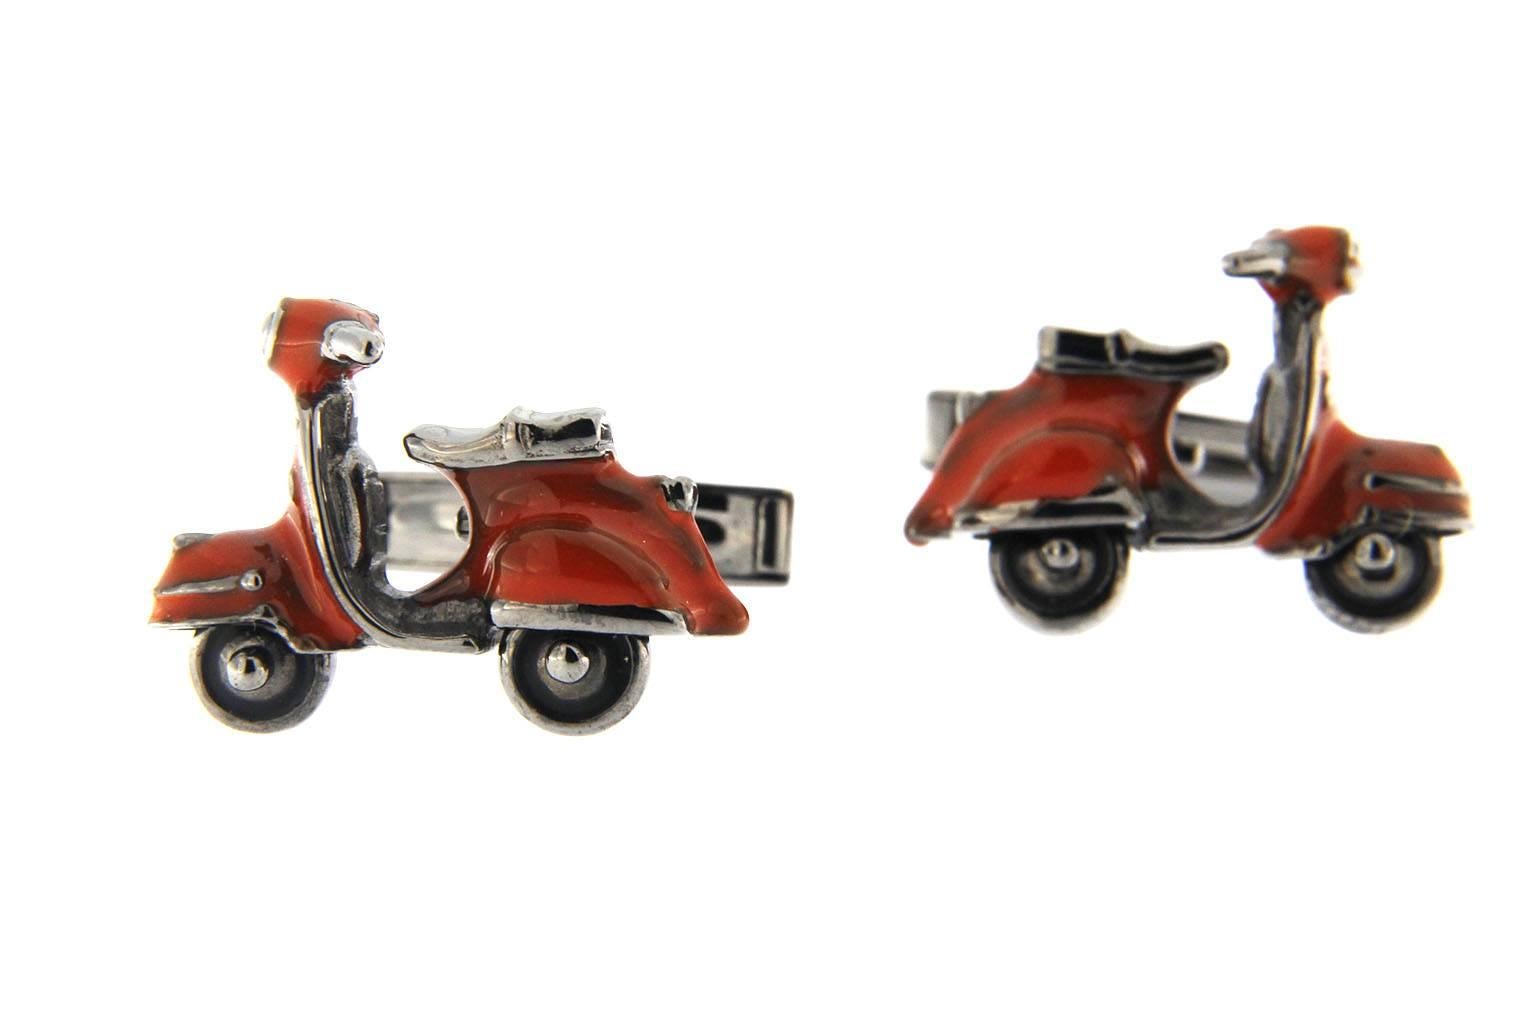 Enameled  sterling silver scooter cufflinks by Jona with rotating wheels;
Black rhodium plated.

All of our jewelry is new and has never been previously owned or worn.